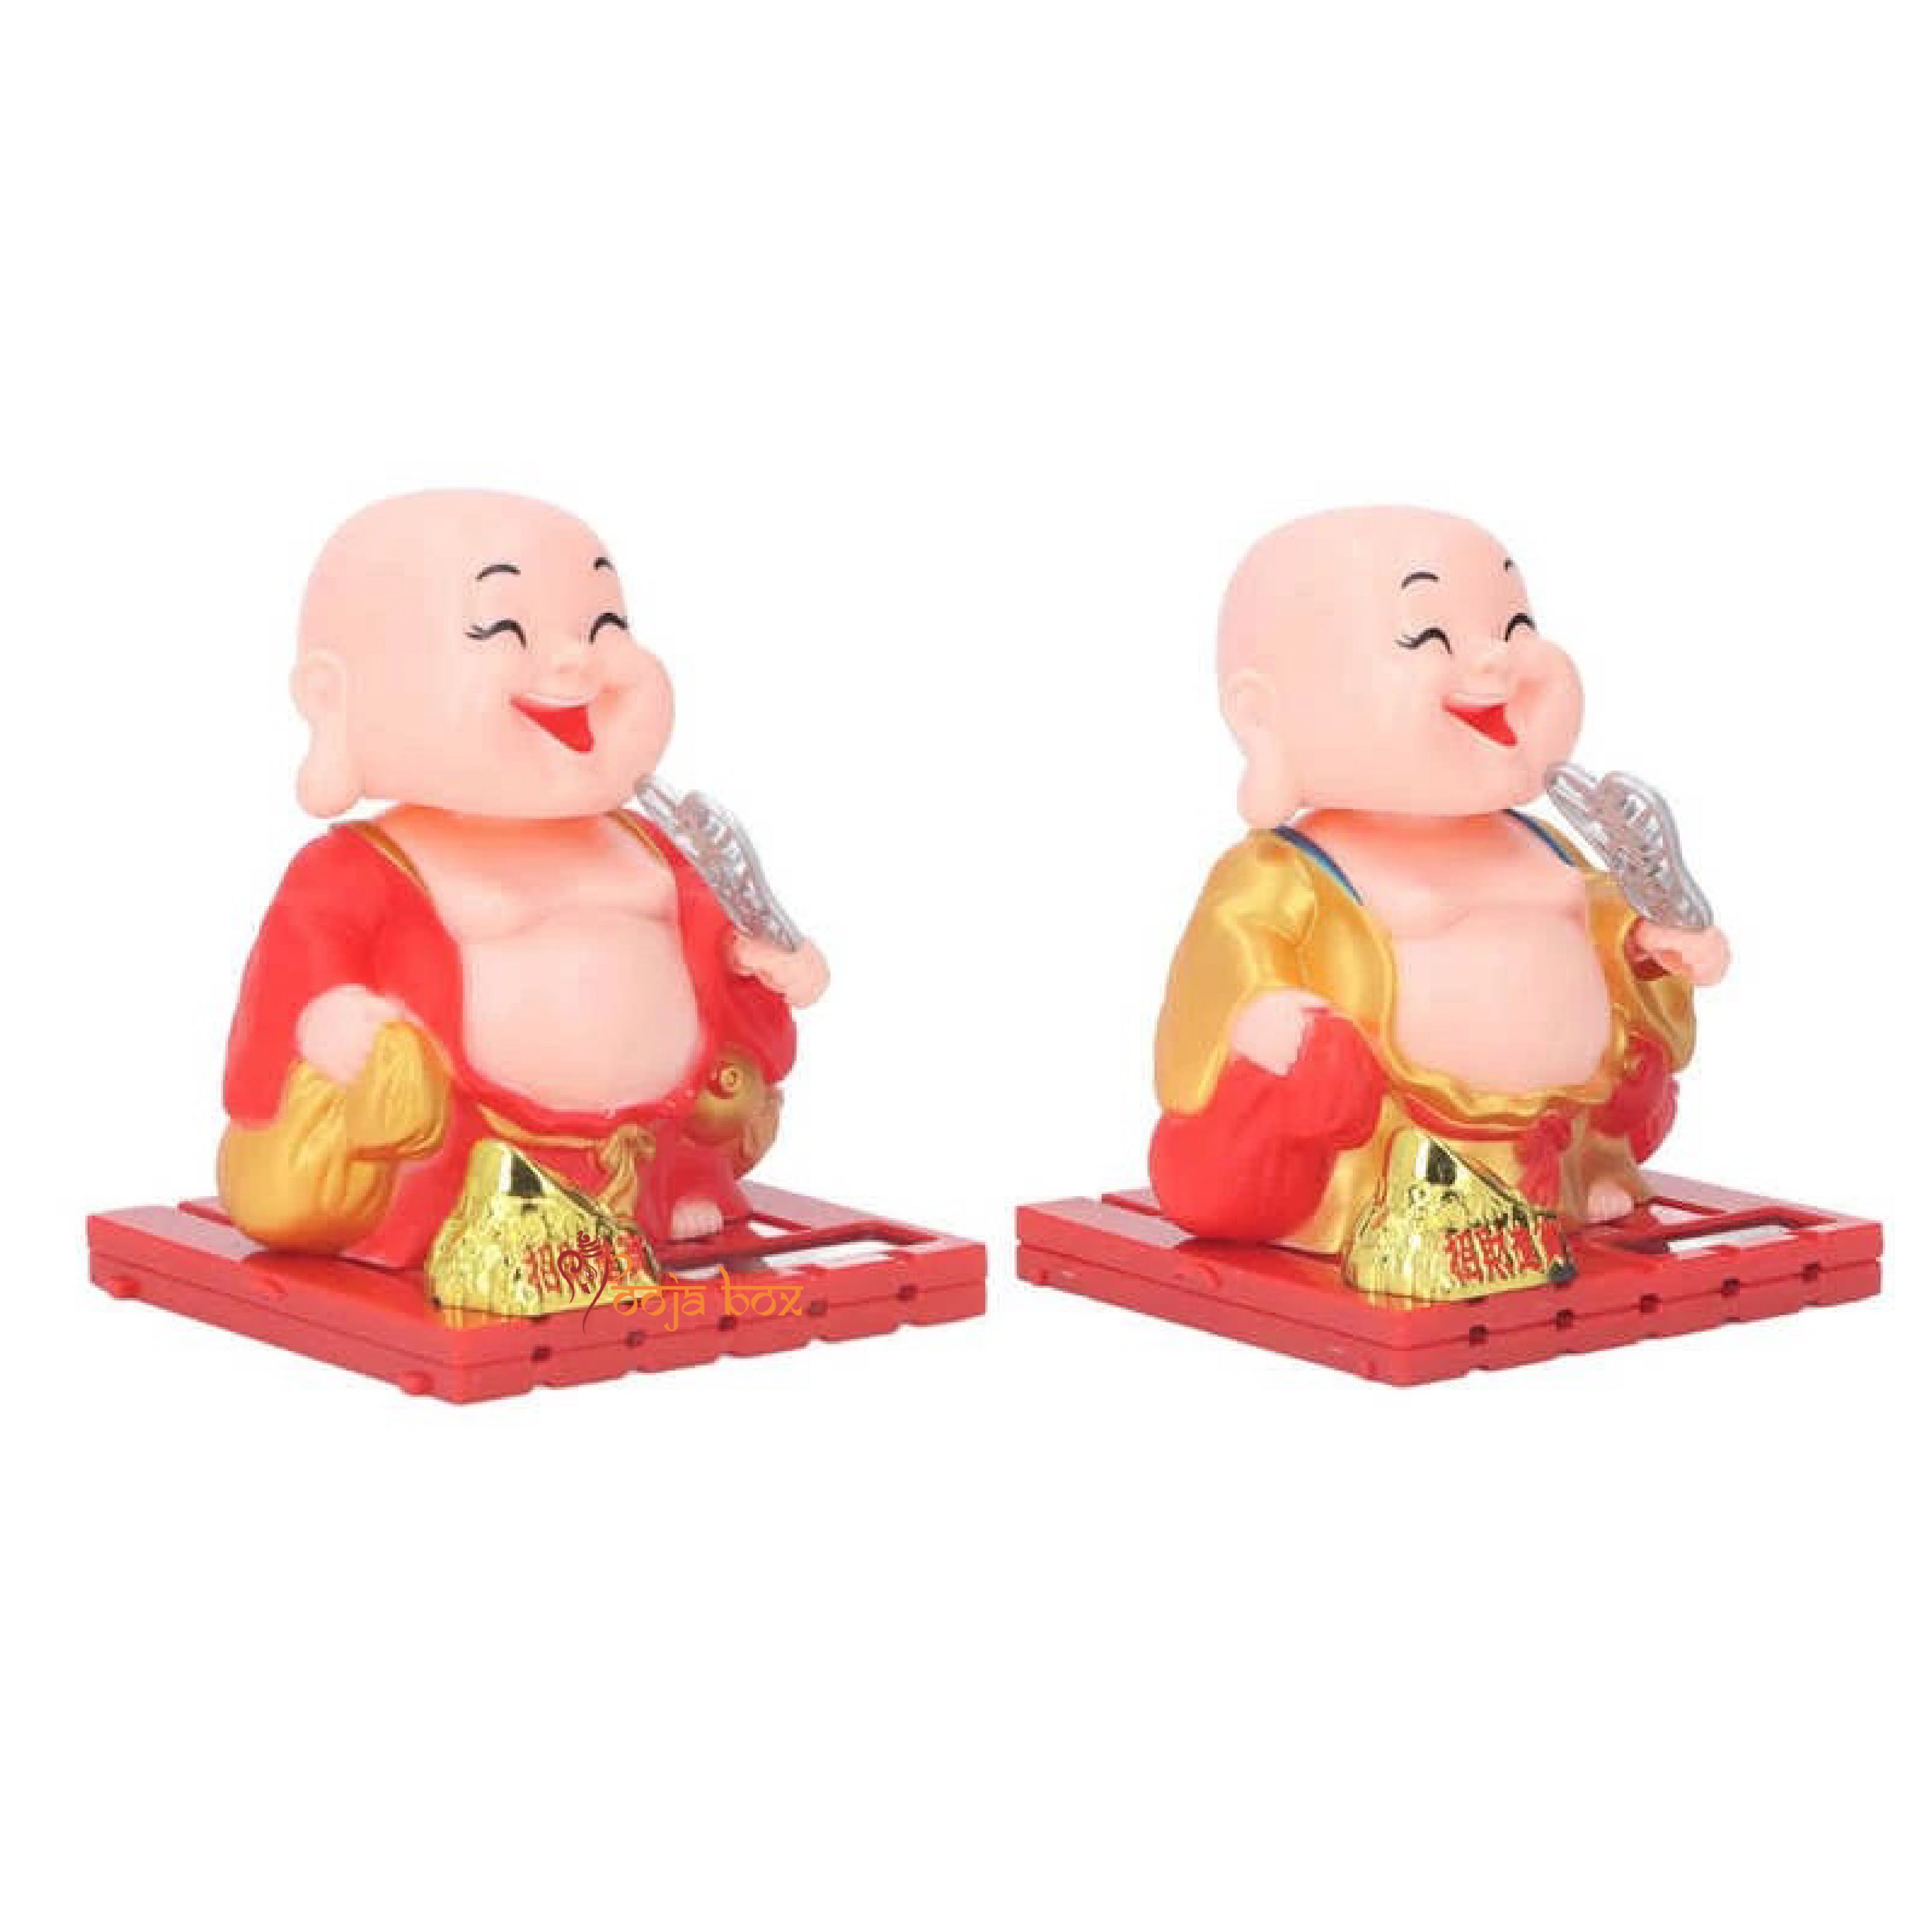 The "Ritualistic Monk" laughing Buddha holding a money bag